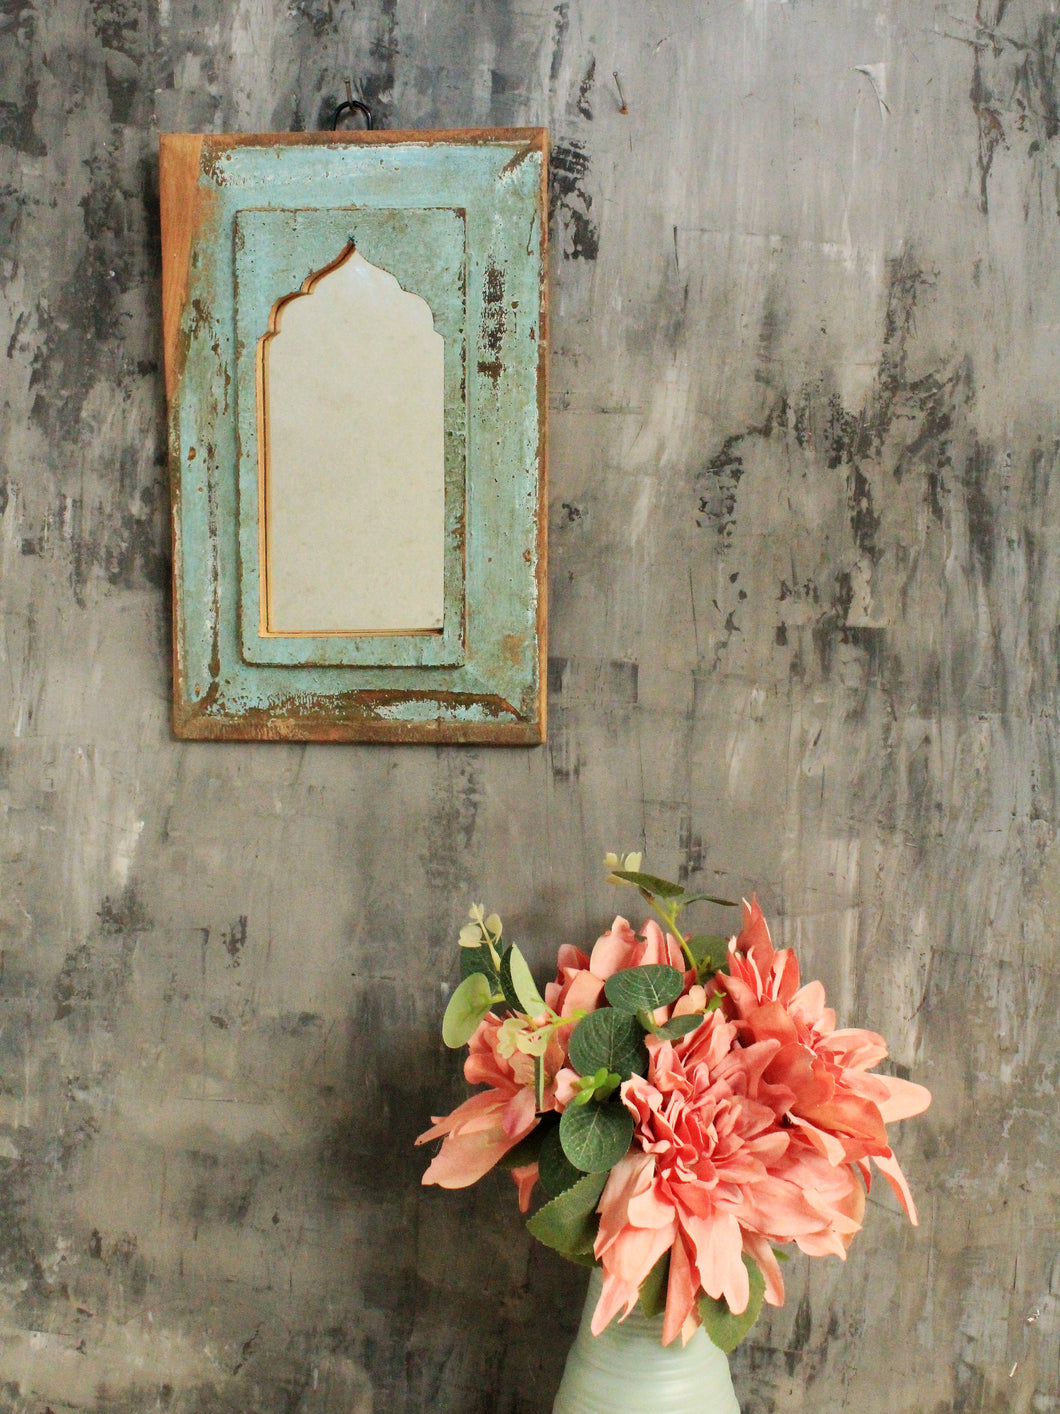 Wooden Distressed Mehraab Mirror Frame made from Vintage Window pane